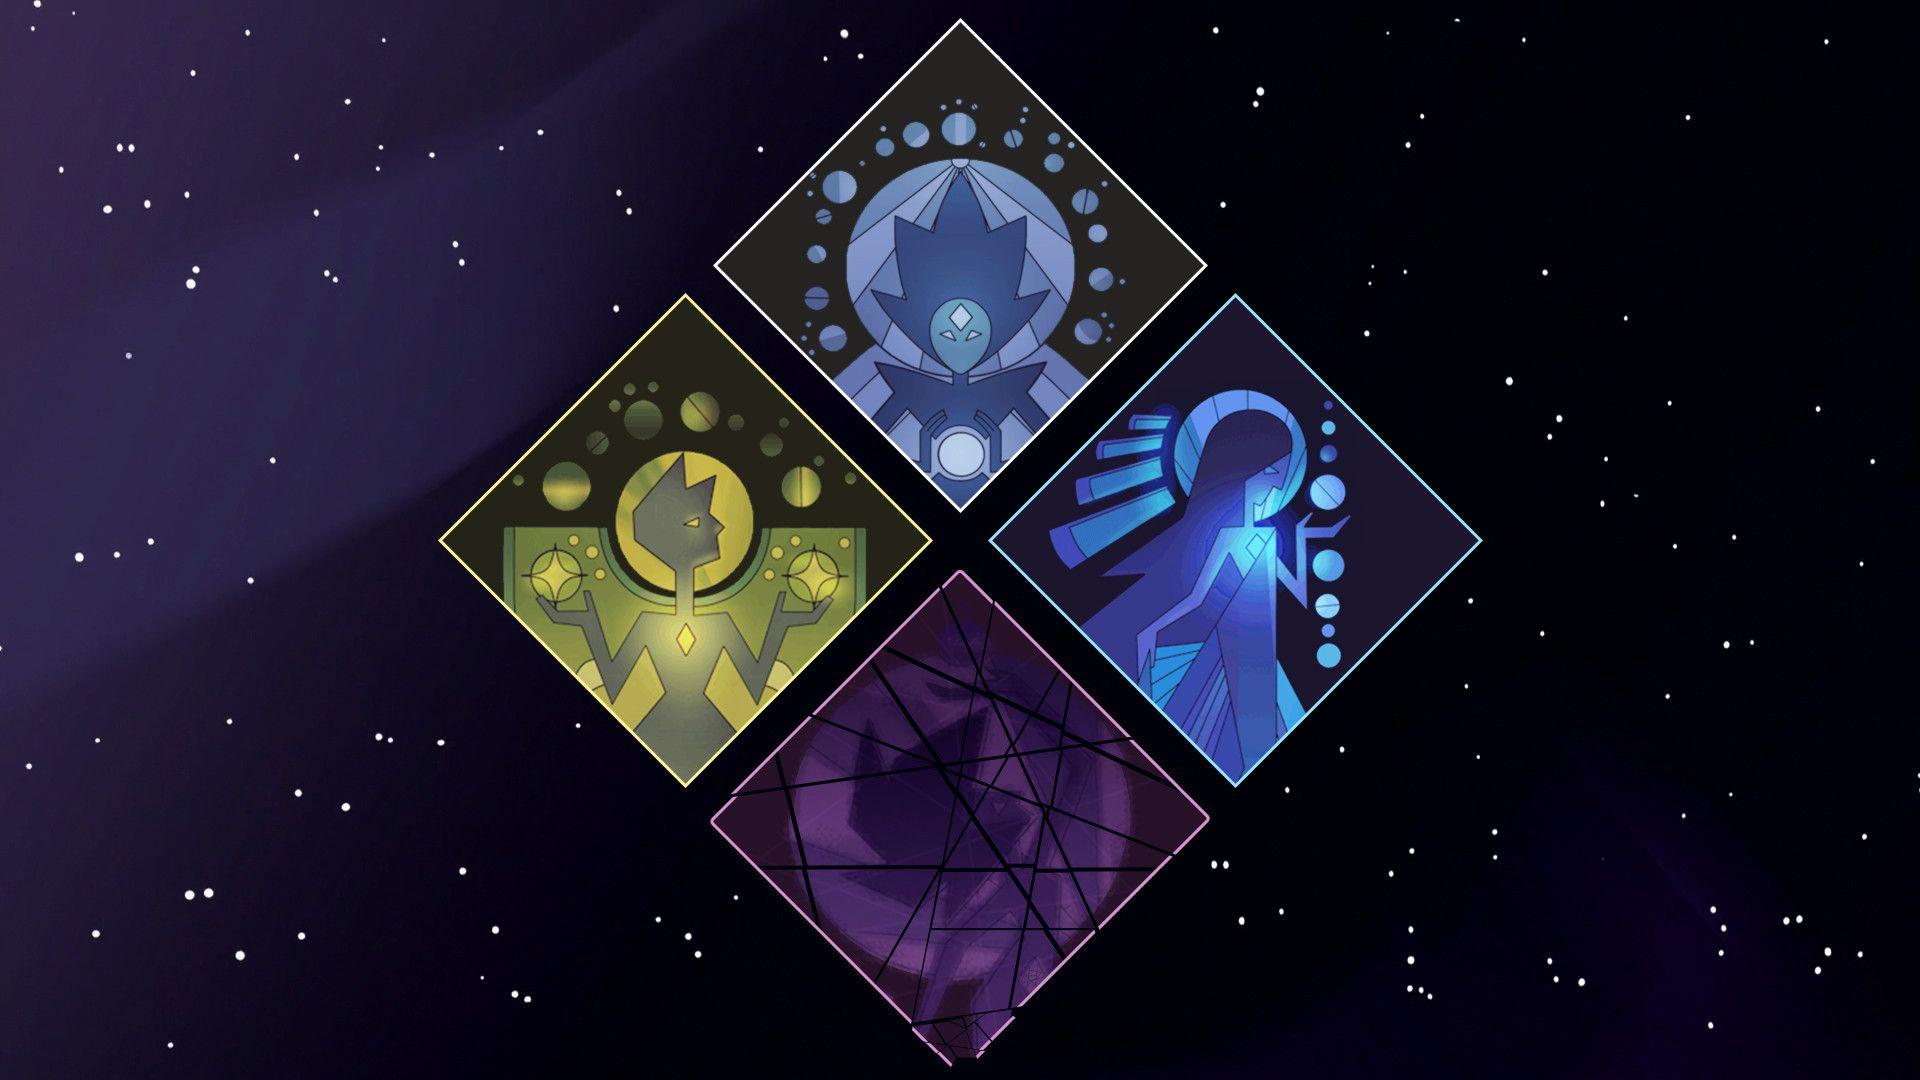 I made a background using The Diamond Authority's